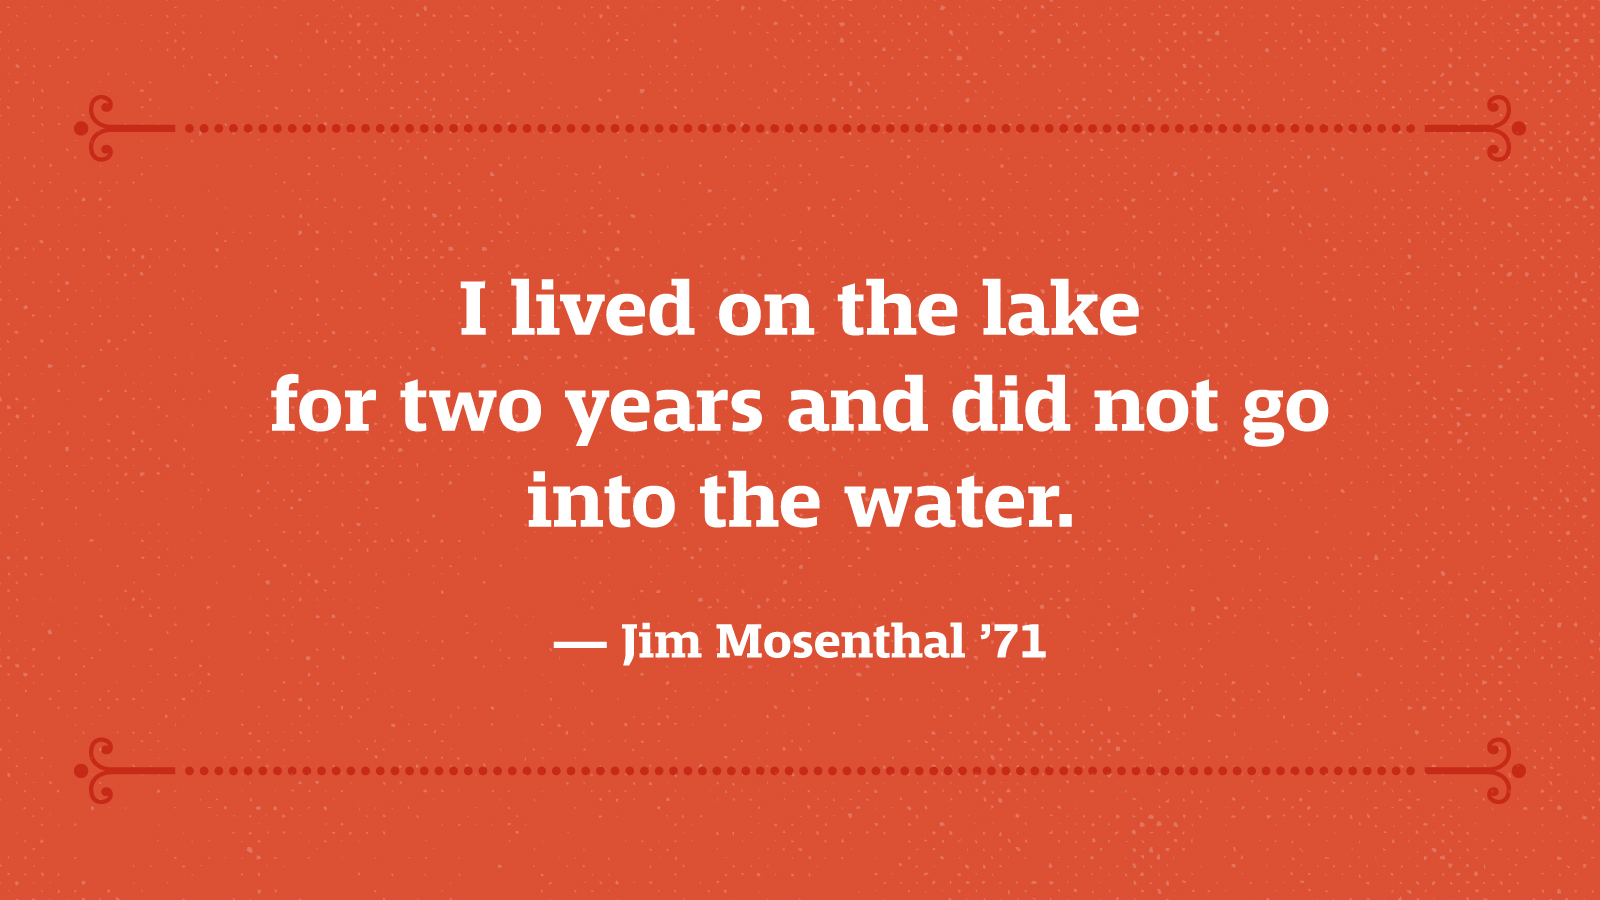 I lived on the lake for two years and did not go into the water. — Jim Mosenthal ’71